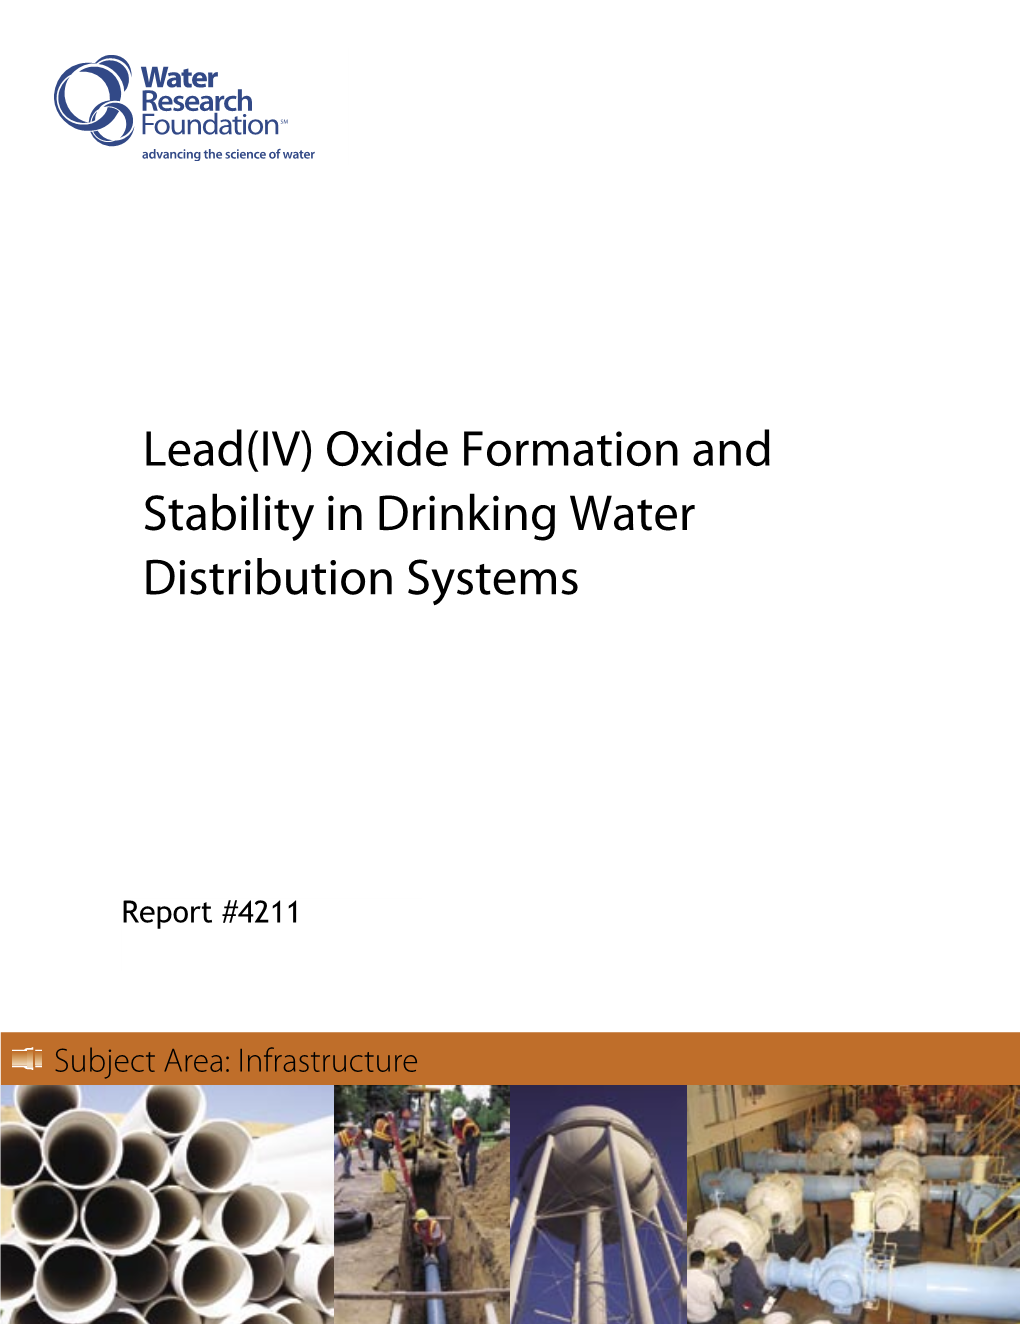 Lead(IV) Oxide Formation and Stabillity in Drinking Water